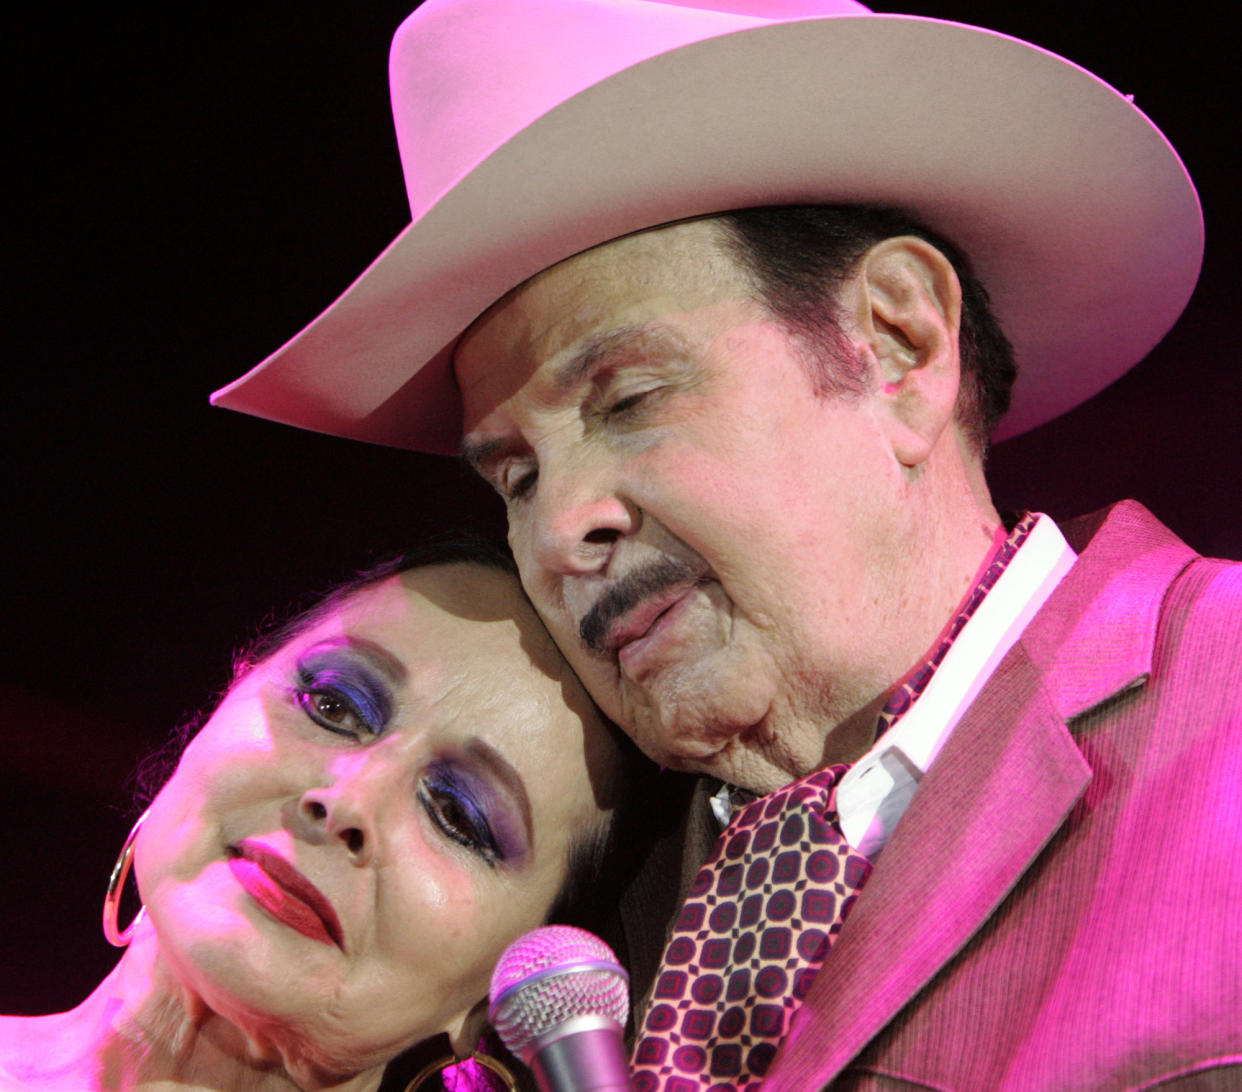 Antonio Aguilar y Flor Silvestre.  (Photo by Lawrence K. Ho/Los Angeles Times via Getty Images)